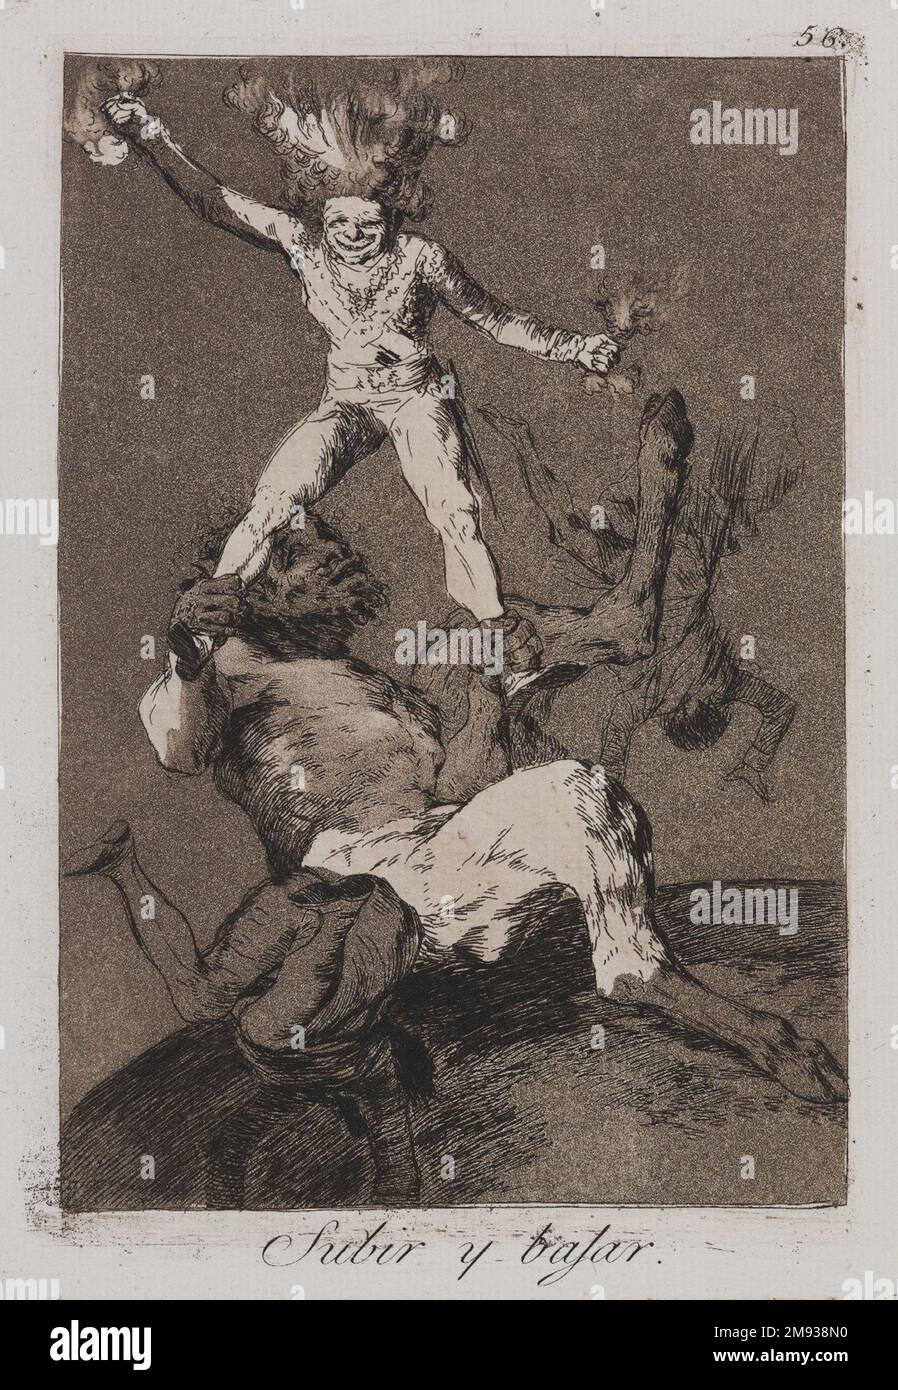 To Rise and Fall (Subir y bajar) Francisco de Goya y Lucientes (Spanish, 1746-1828). To Rise and Fall (Subir y bajar), 1797-1798. Etching and aquatint on laid paper, Sheet: 11 7/8 x 8 in. (30.2 x 20.3 cm).  The Caprices (Los Caprichos) is a set of eighty etchings created between 1797 and 1798. On view are thirteen examples of the Brooklyn Museum’s rare “trial proof” set, which is composed of early impressions of a print made by the artist prior to the published edition. In the first part of the series, Goya critiques the characters, institutions, and values of early modern Spanish society; the Stock Photo